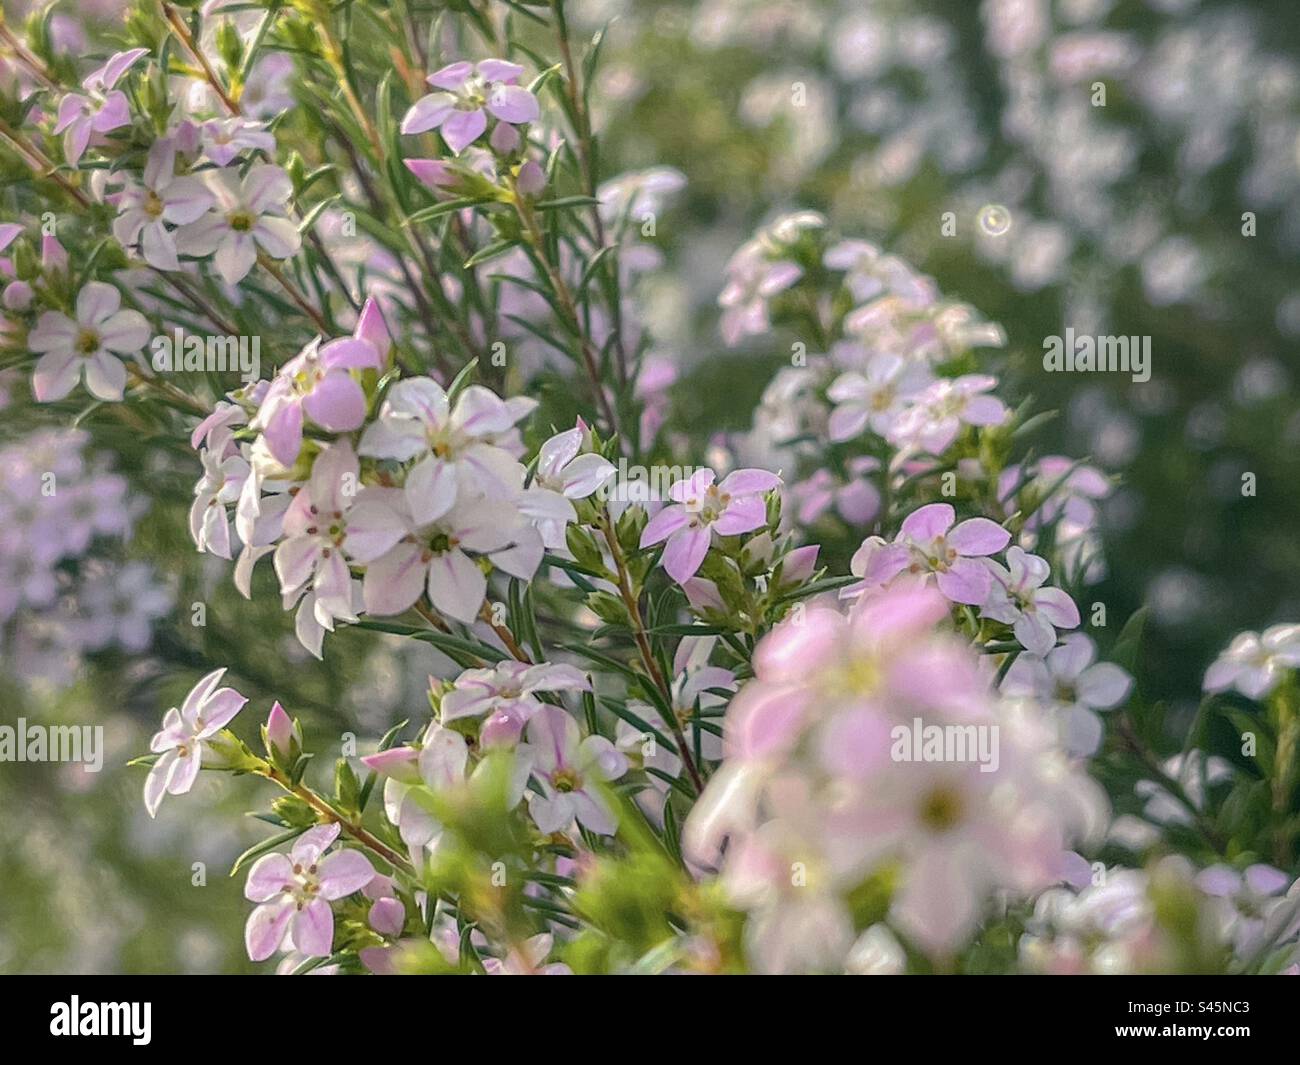 Close-up of flowers of Coleonema pulchellum or pink diosma. Selective focus. Stock Photo